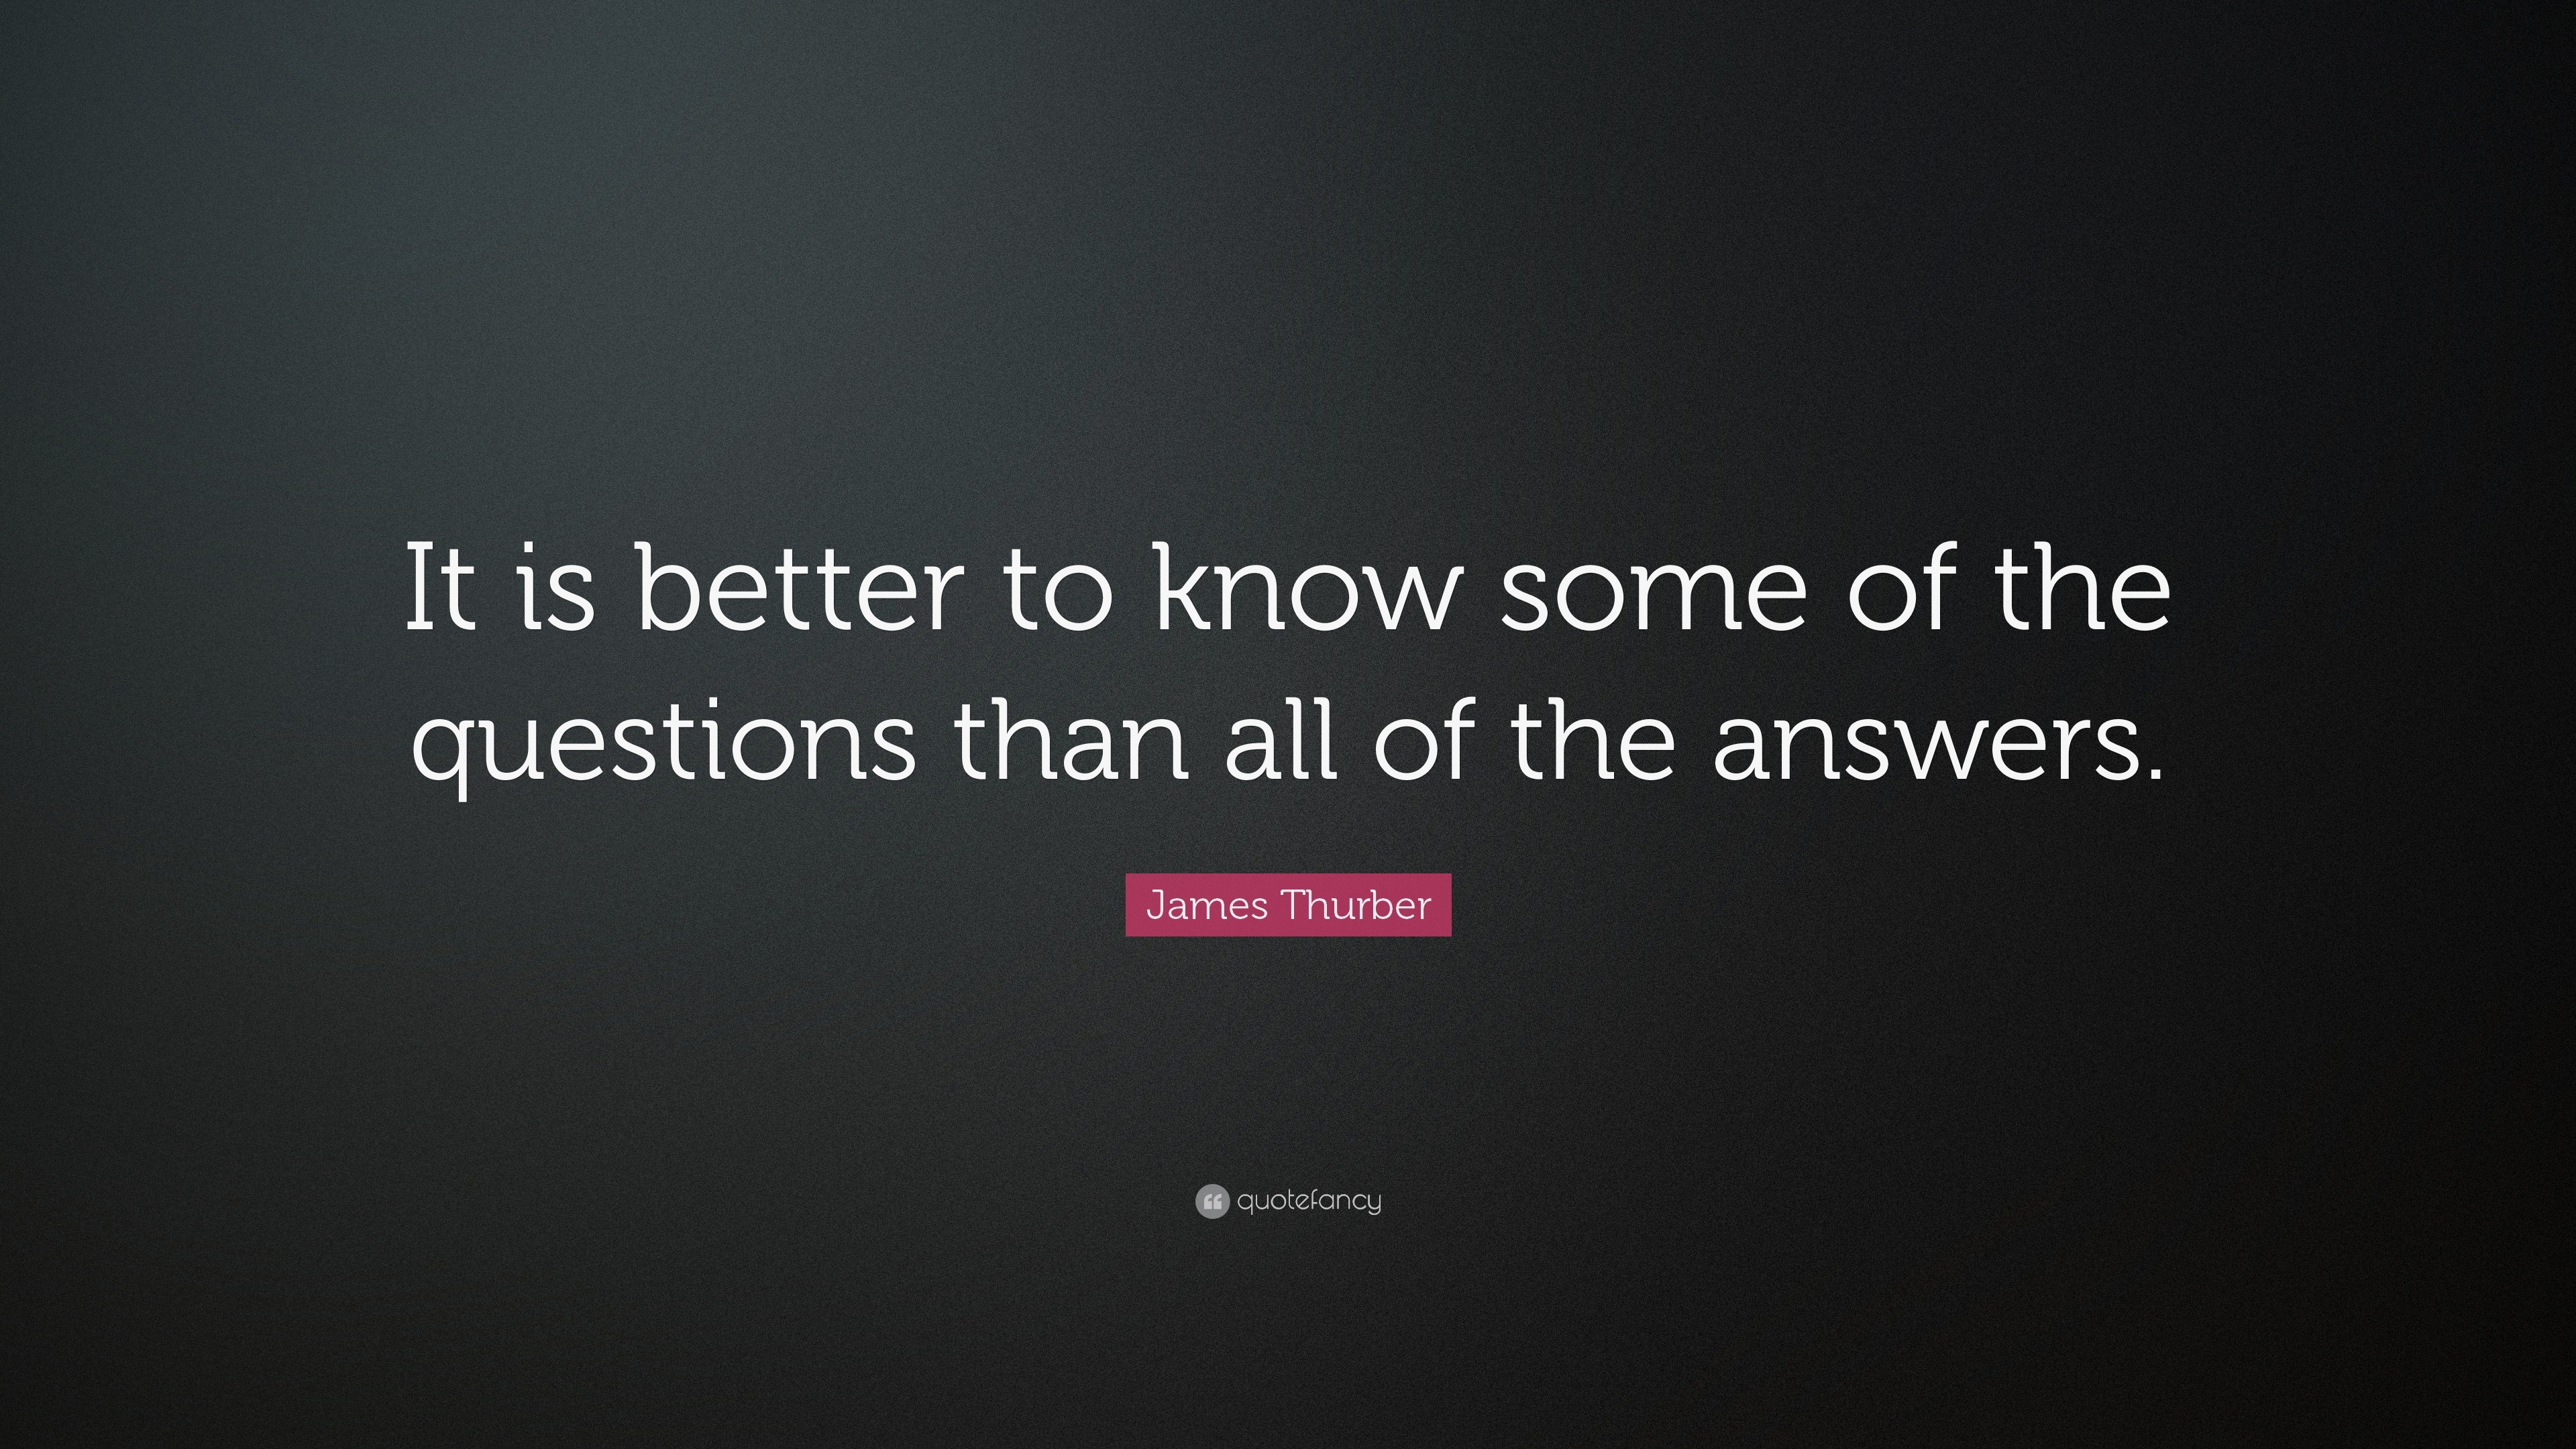 James Thurber Quote: “It is better to know some of the questions than ...